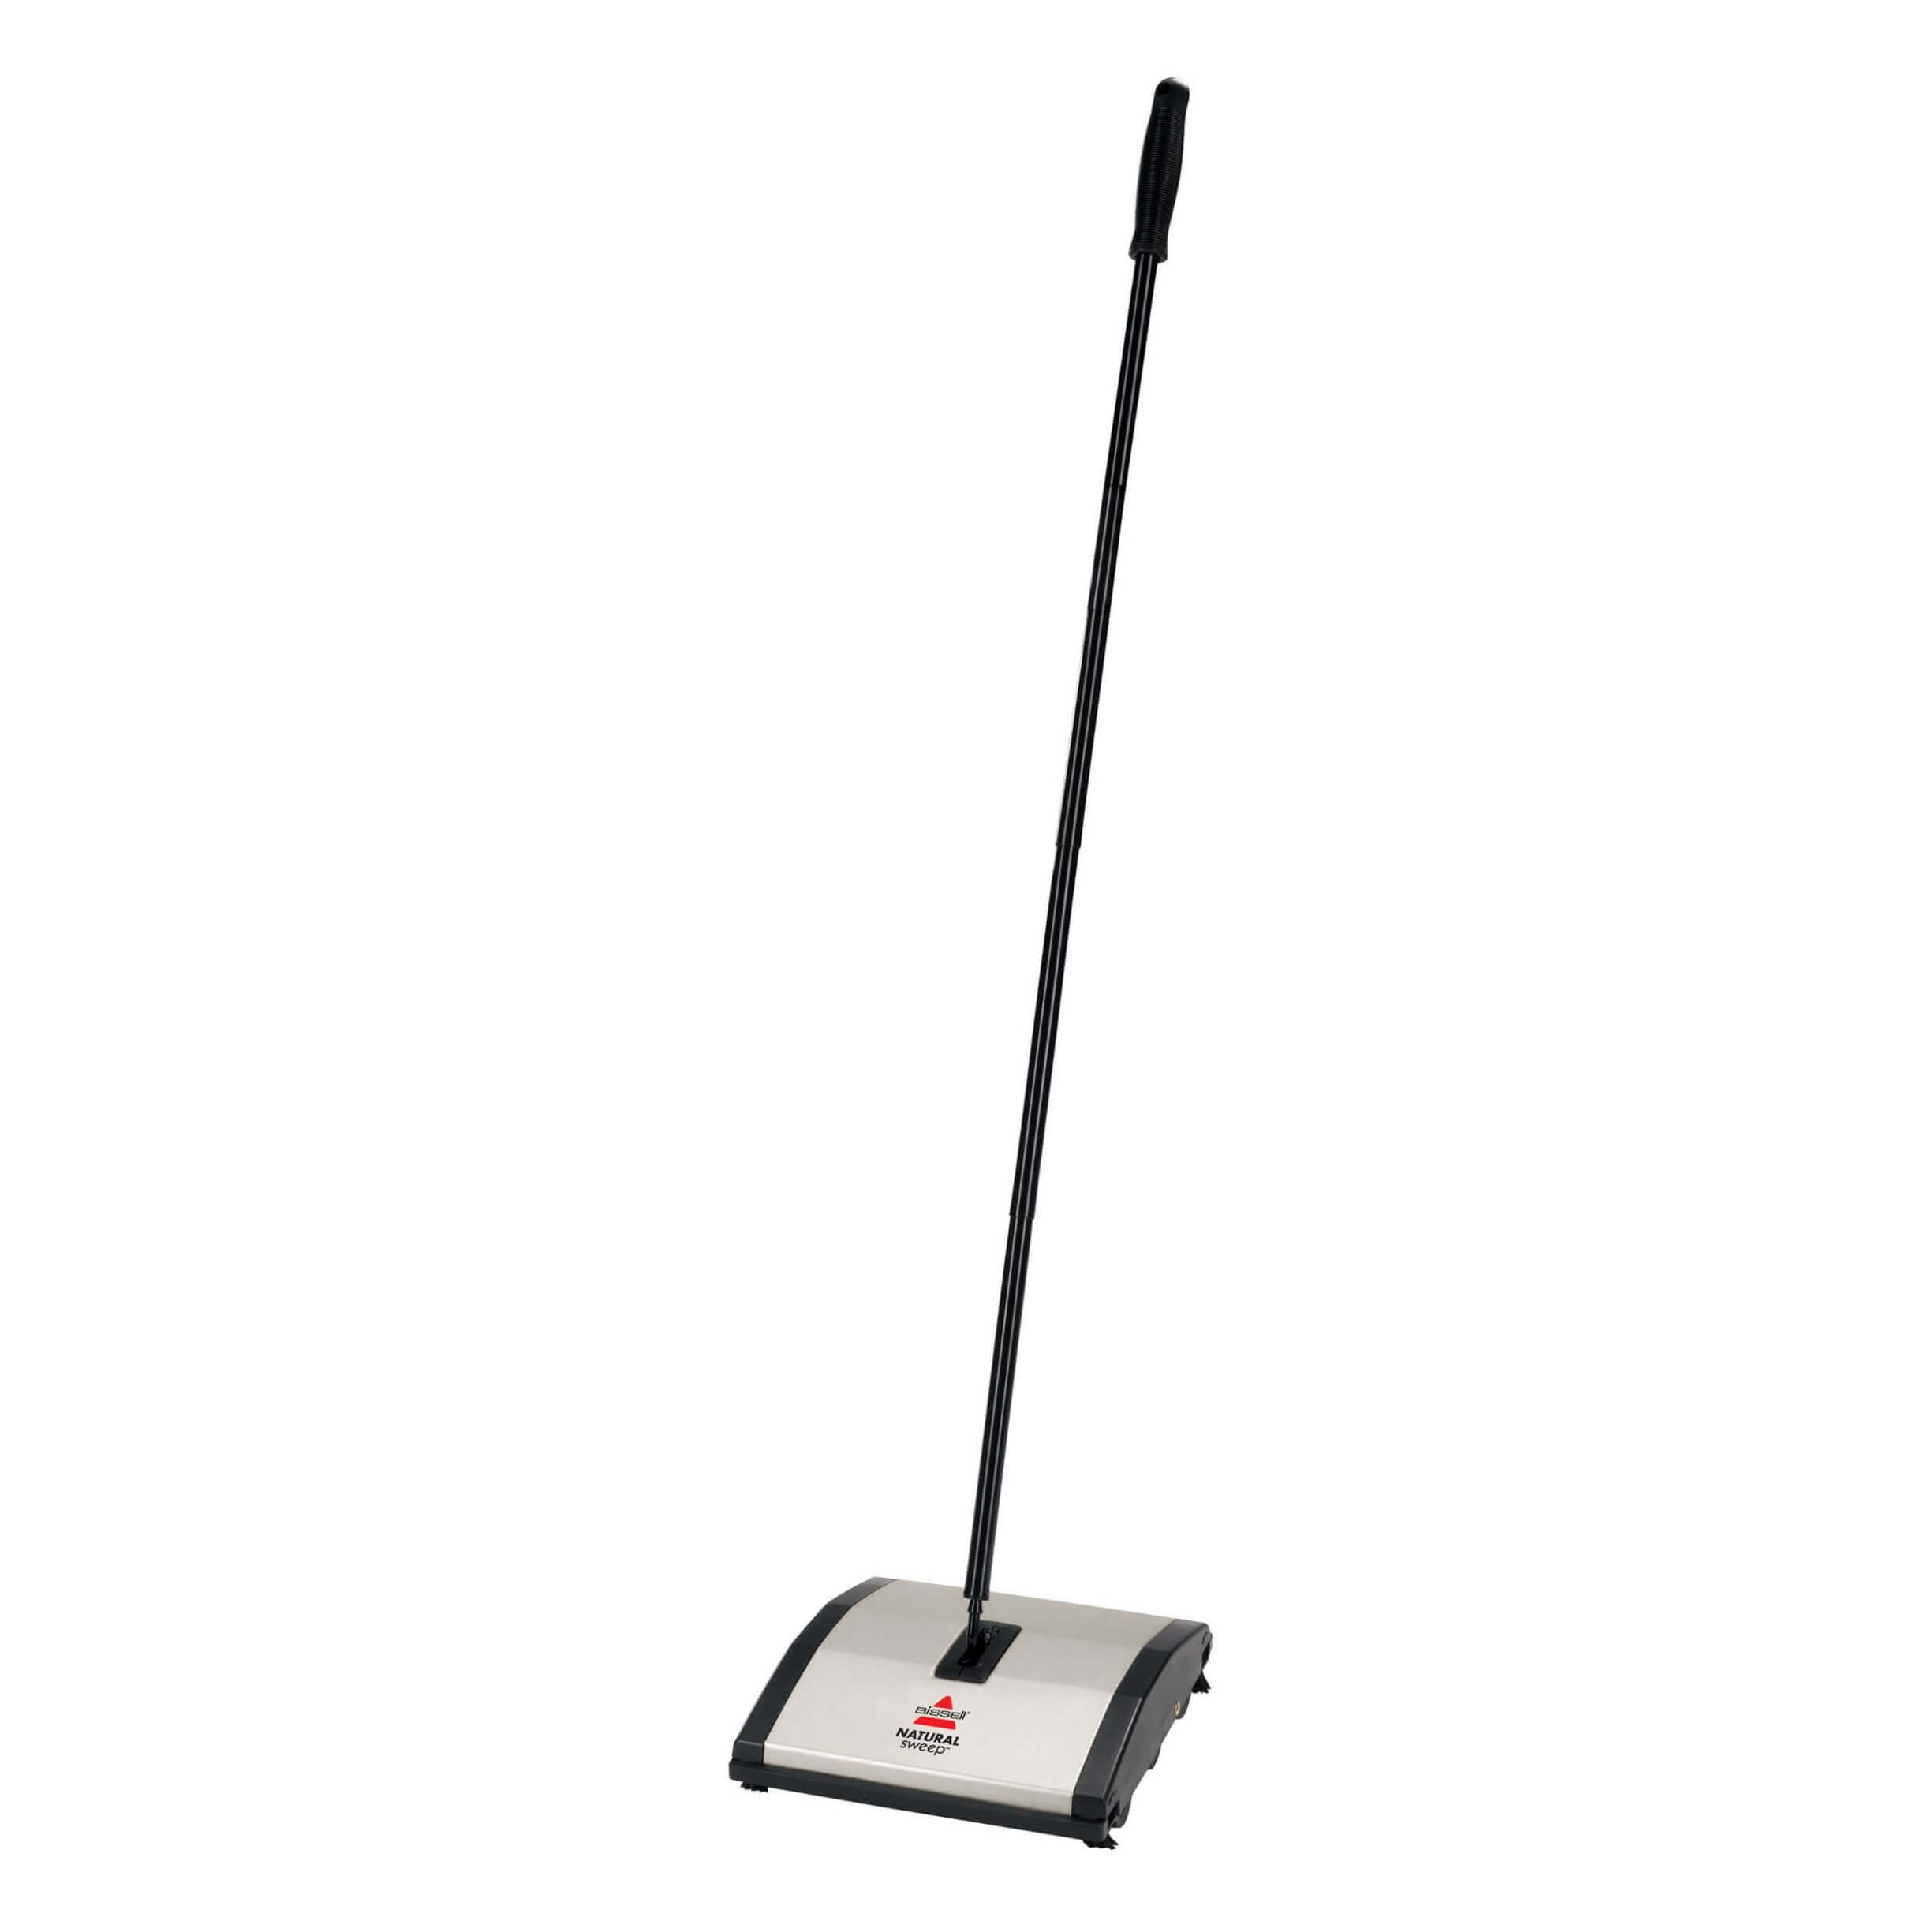 Push Type Sweeper With Dual Rotating System Works On Carpets & Hard Floor Surfaces Natural Sweep Carpet And Floor Sweeper,Hand 